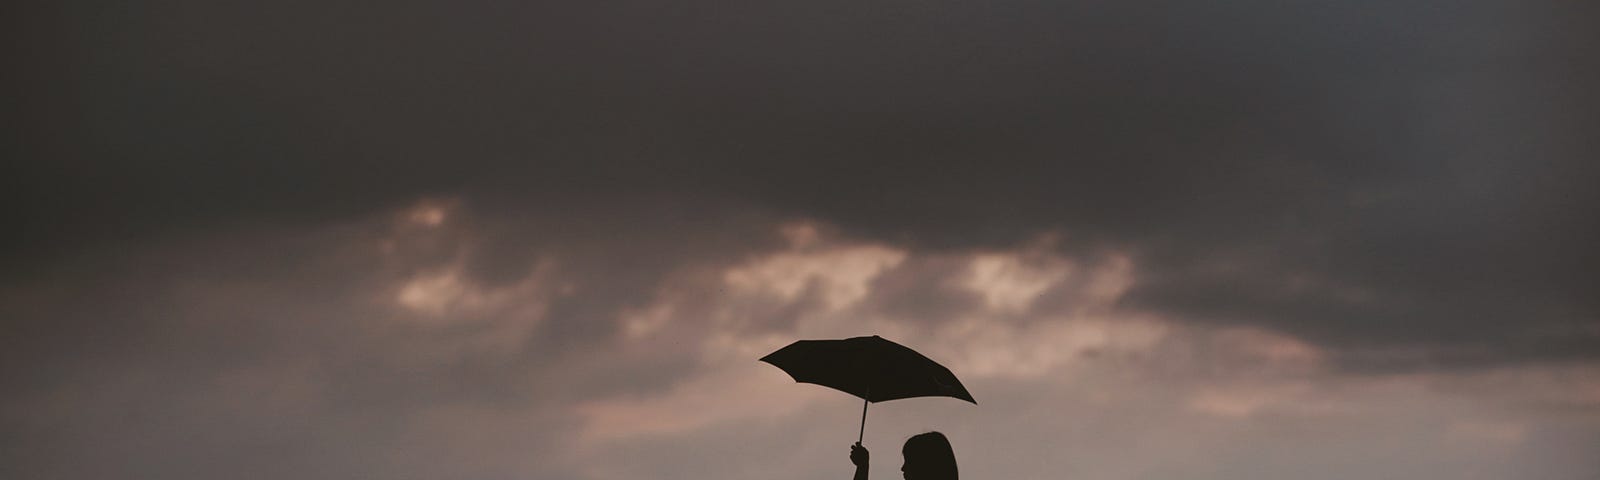 Image of woman holding an umbrella over a child.